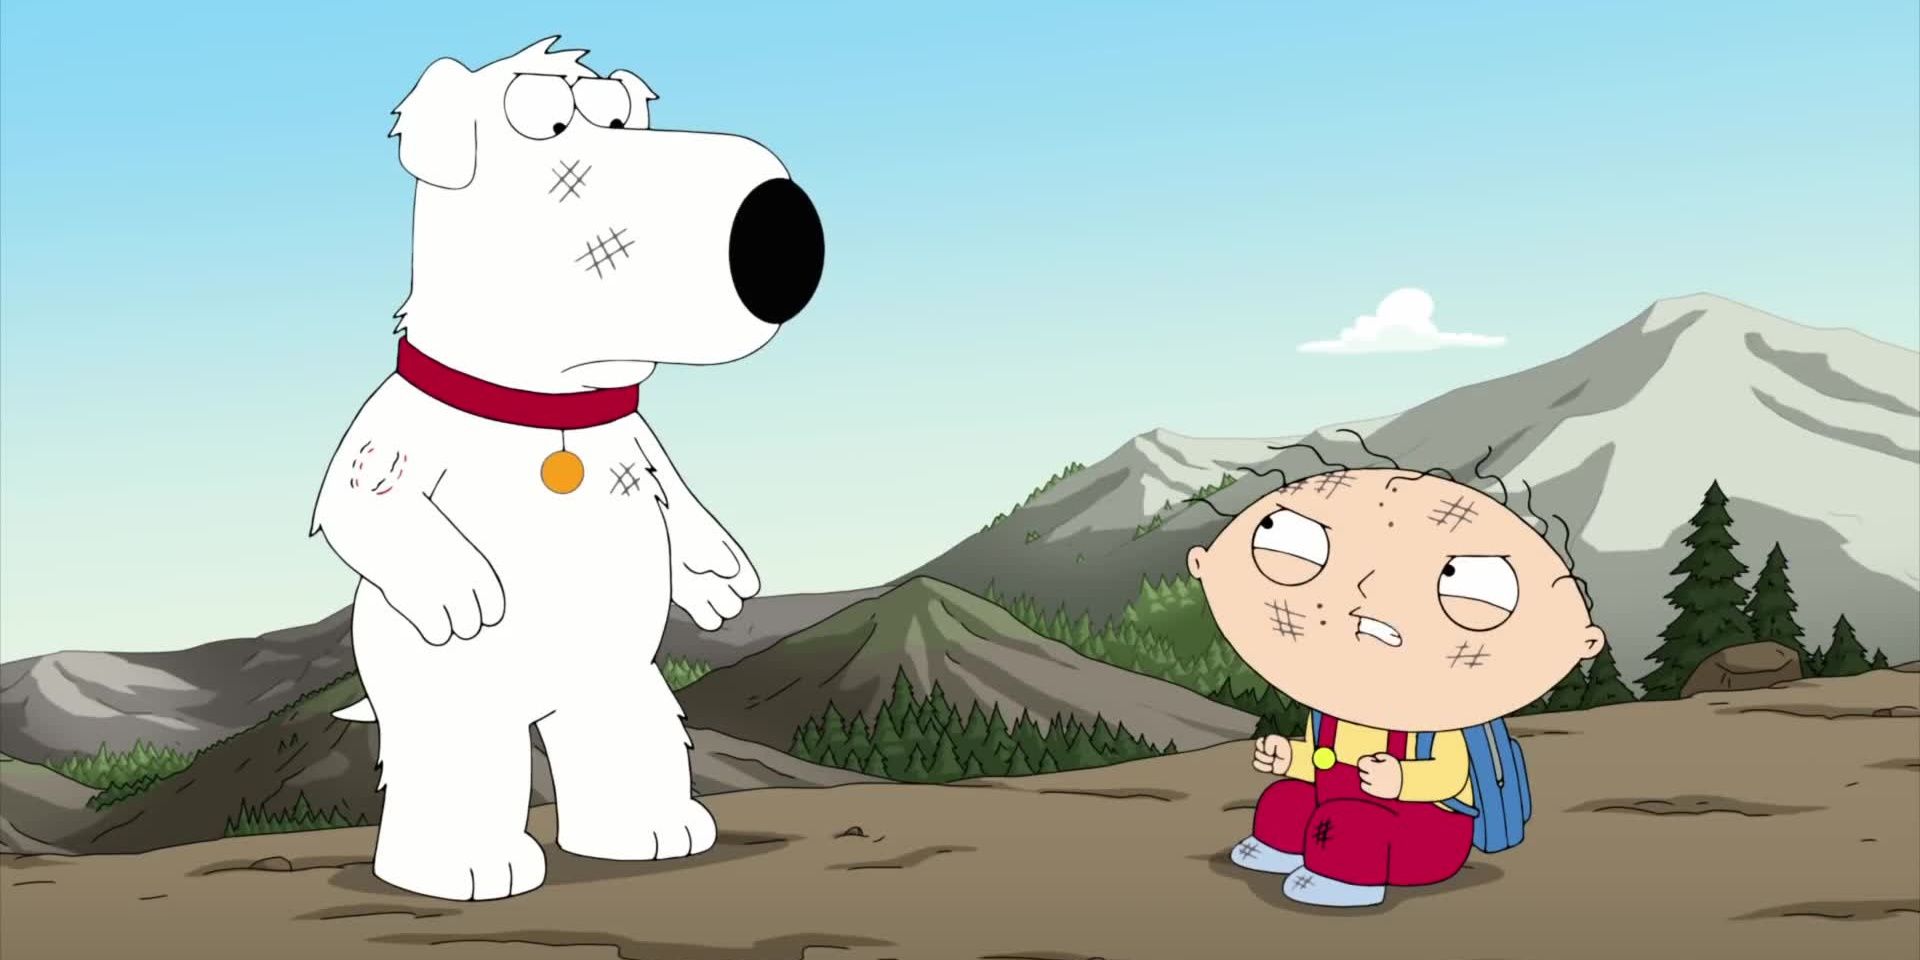 Stewie yelling at Brian on mountain